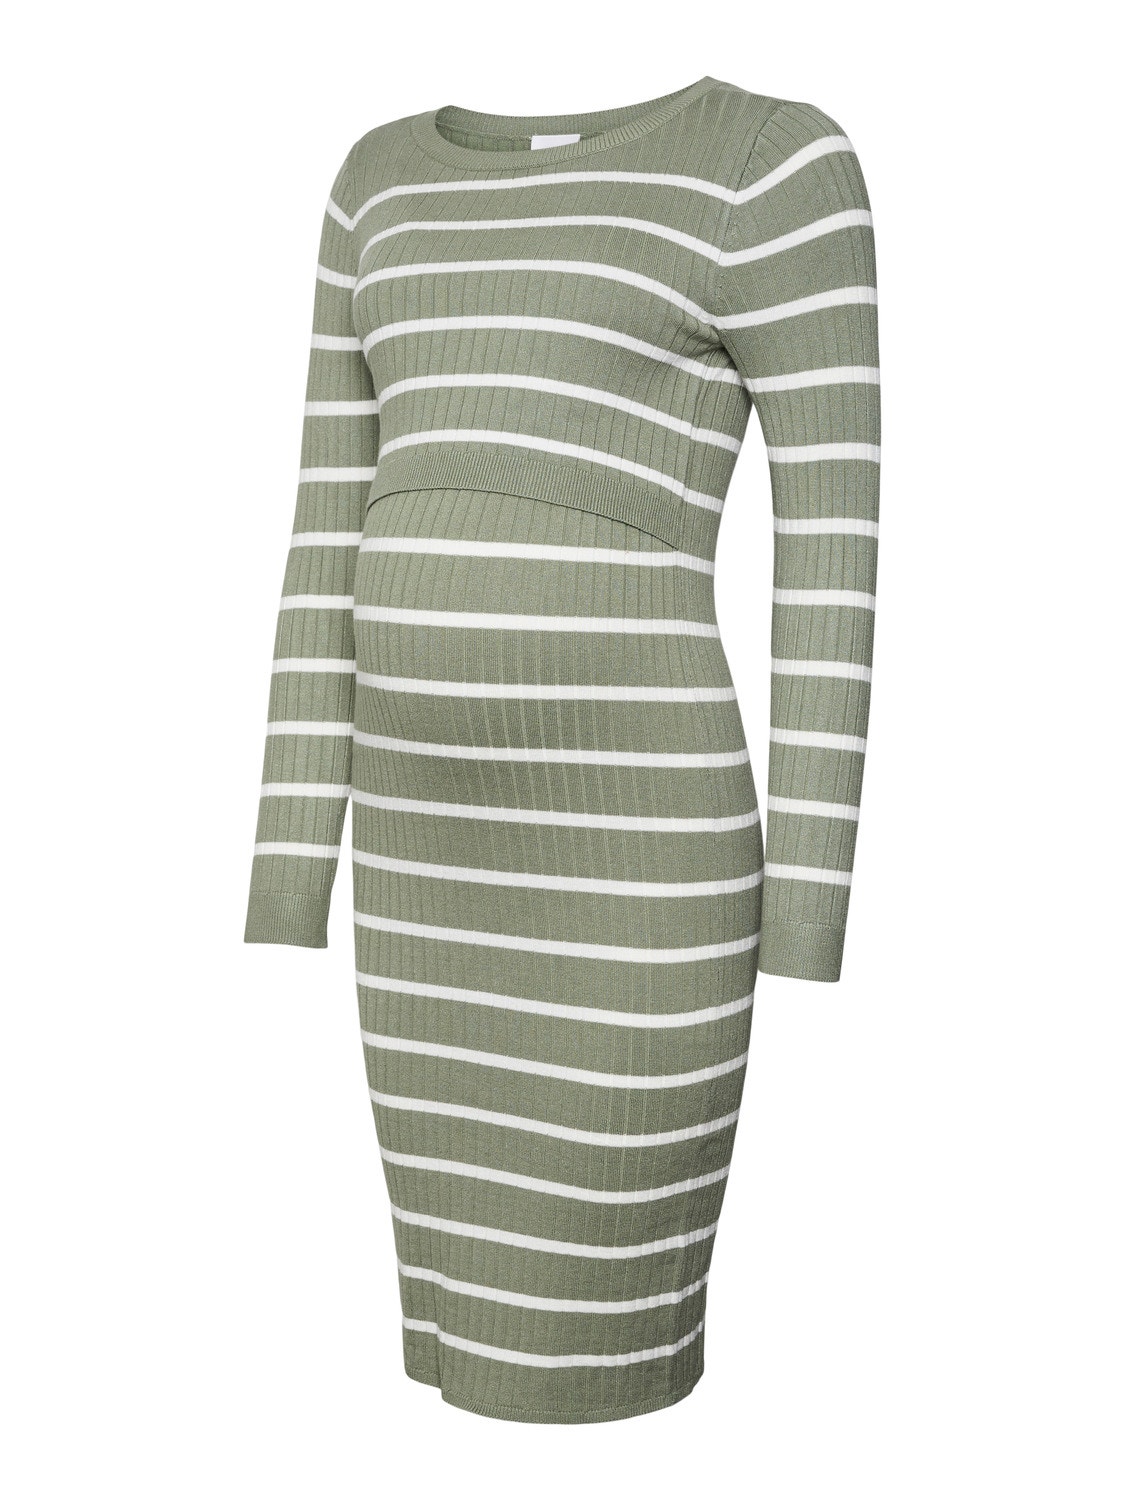 Knitted maternity-dress with 20% discount!